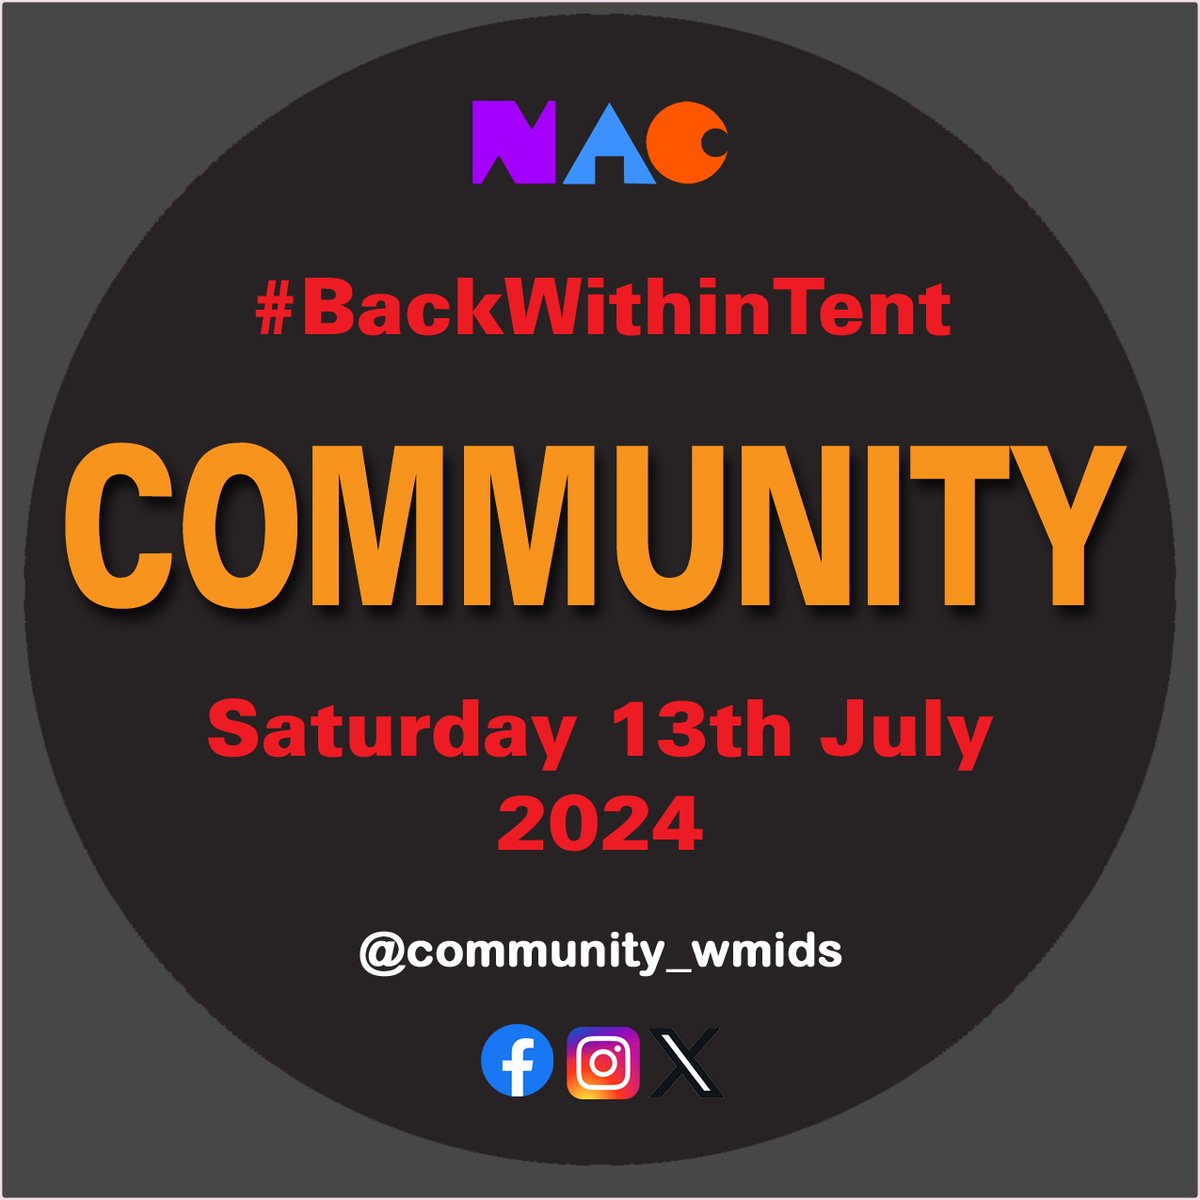 Summer's a way off yet but Community will be back within tent @Newhampton on Sat 13th July, when all profits will again be donated to @samaritans Save the date and be part of the community 🧡